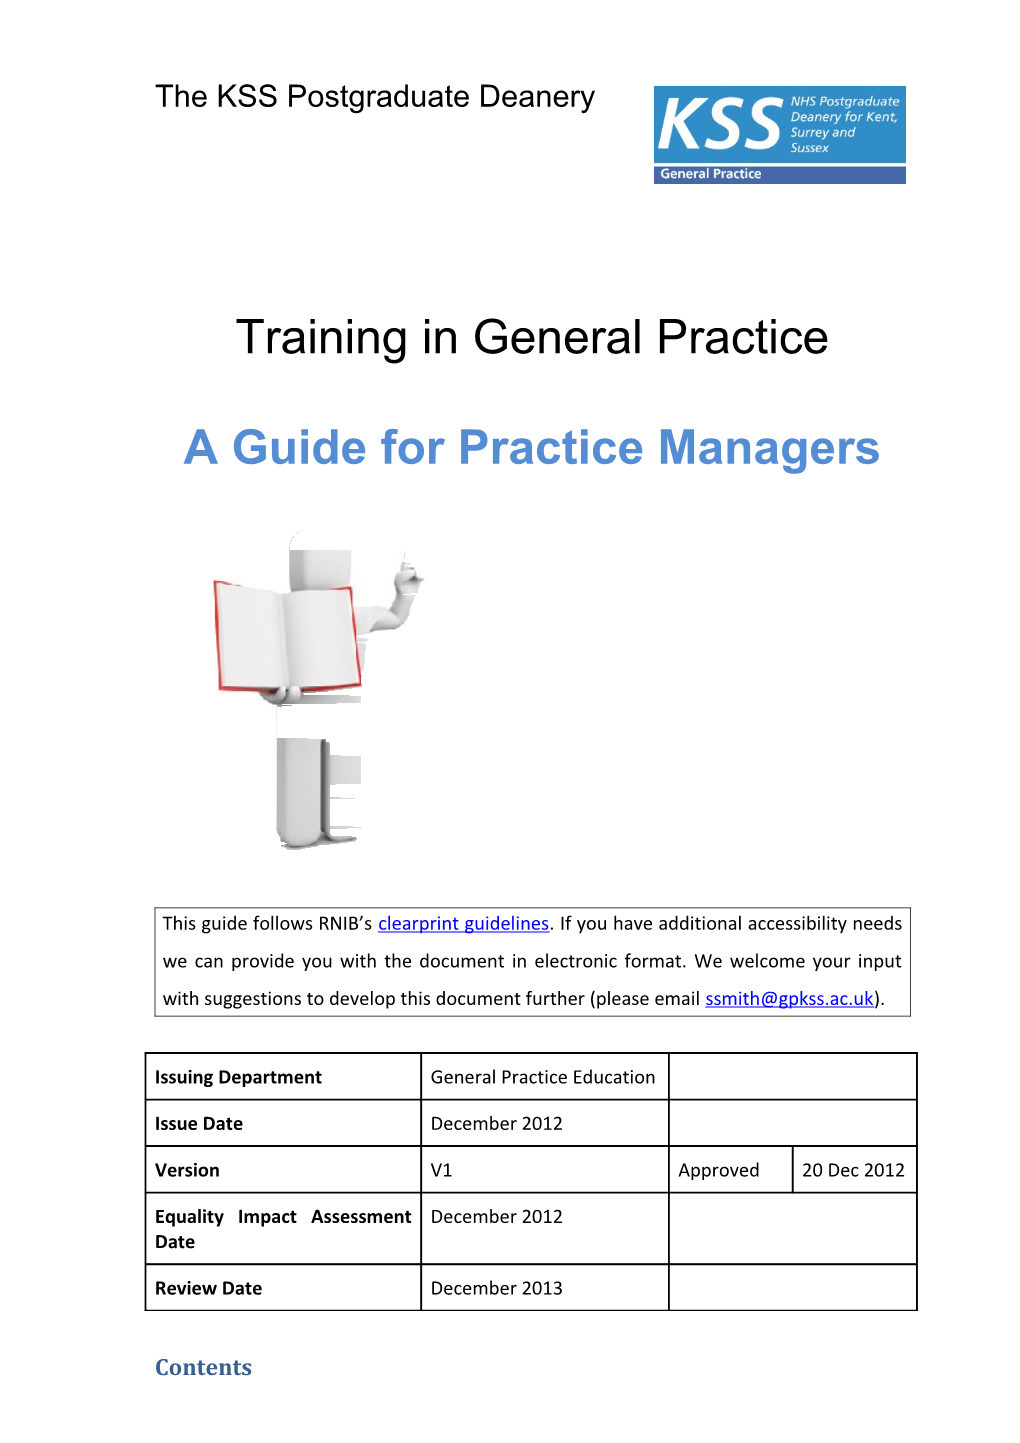 GP Training Practices: a Guide for Practice Managers